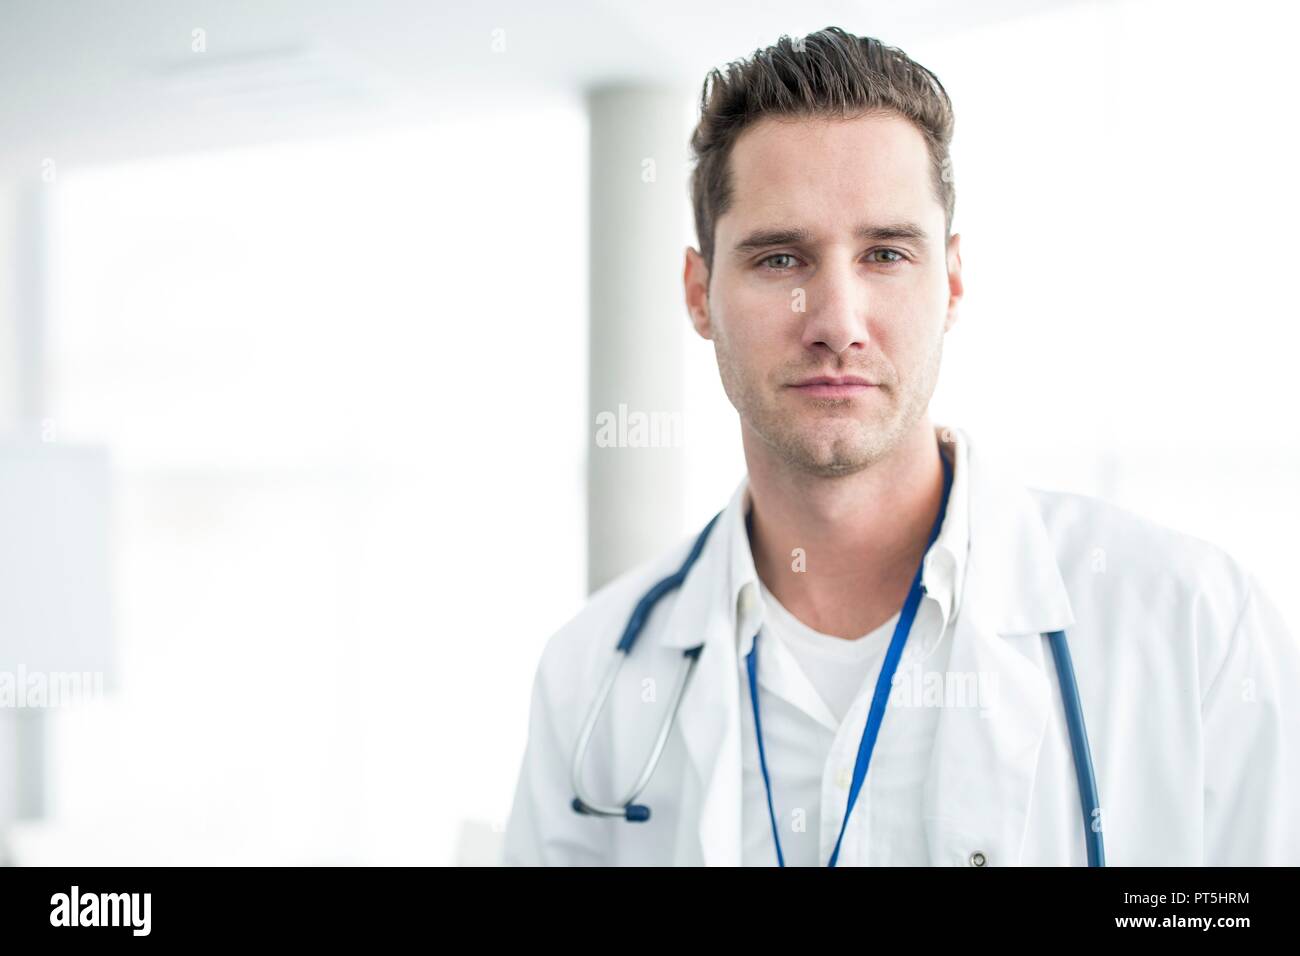 Portrait of mature male doctor looking at camera. Banque D'Images